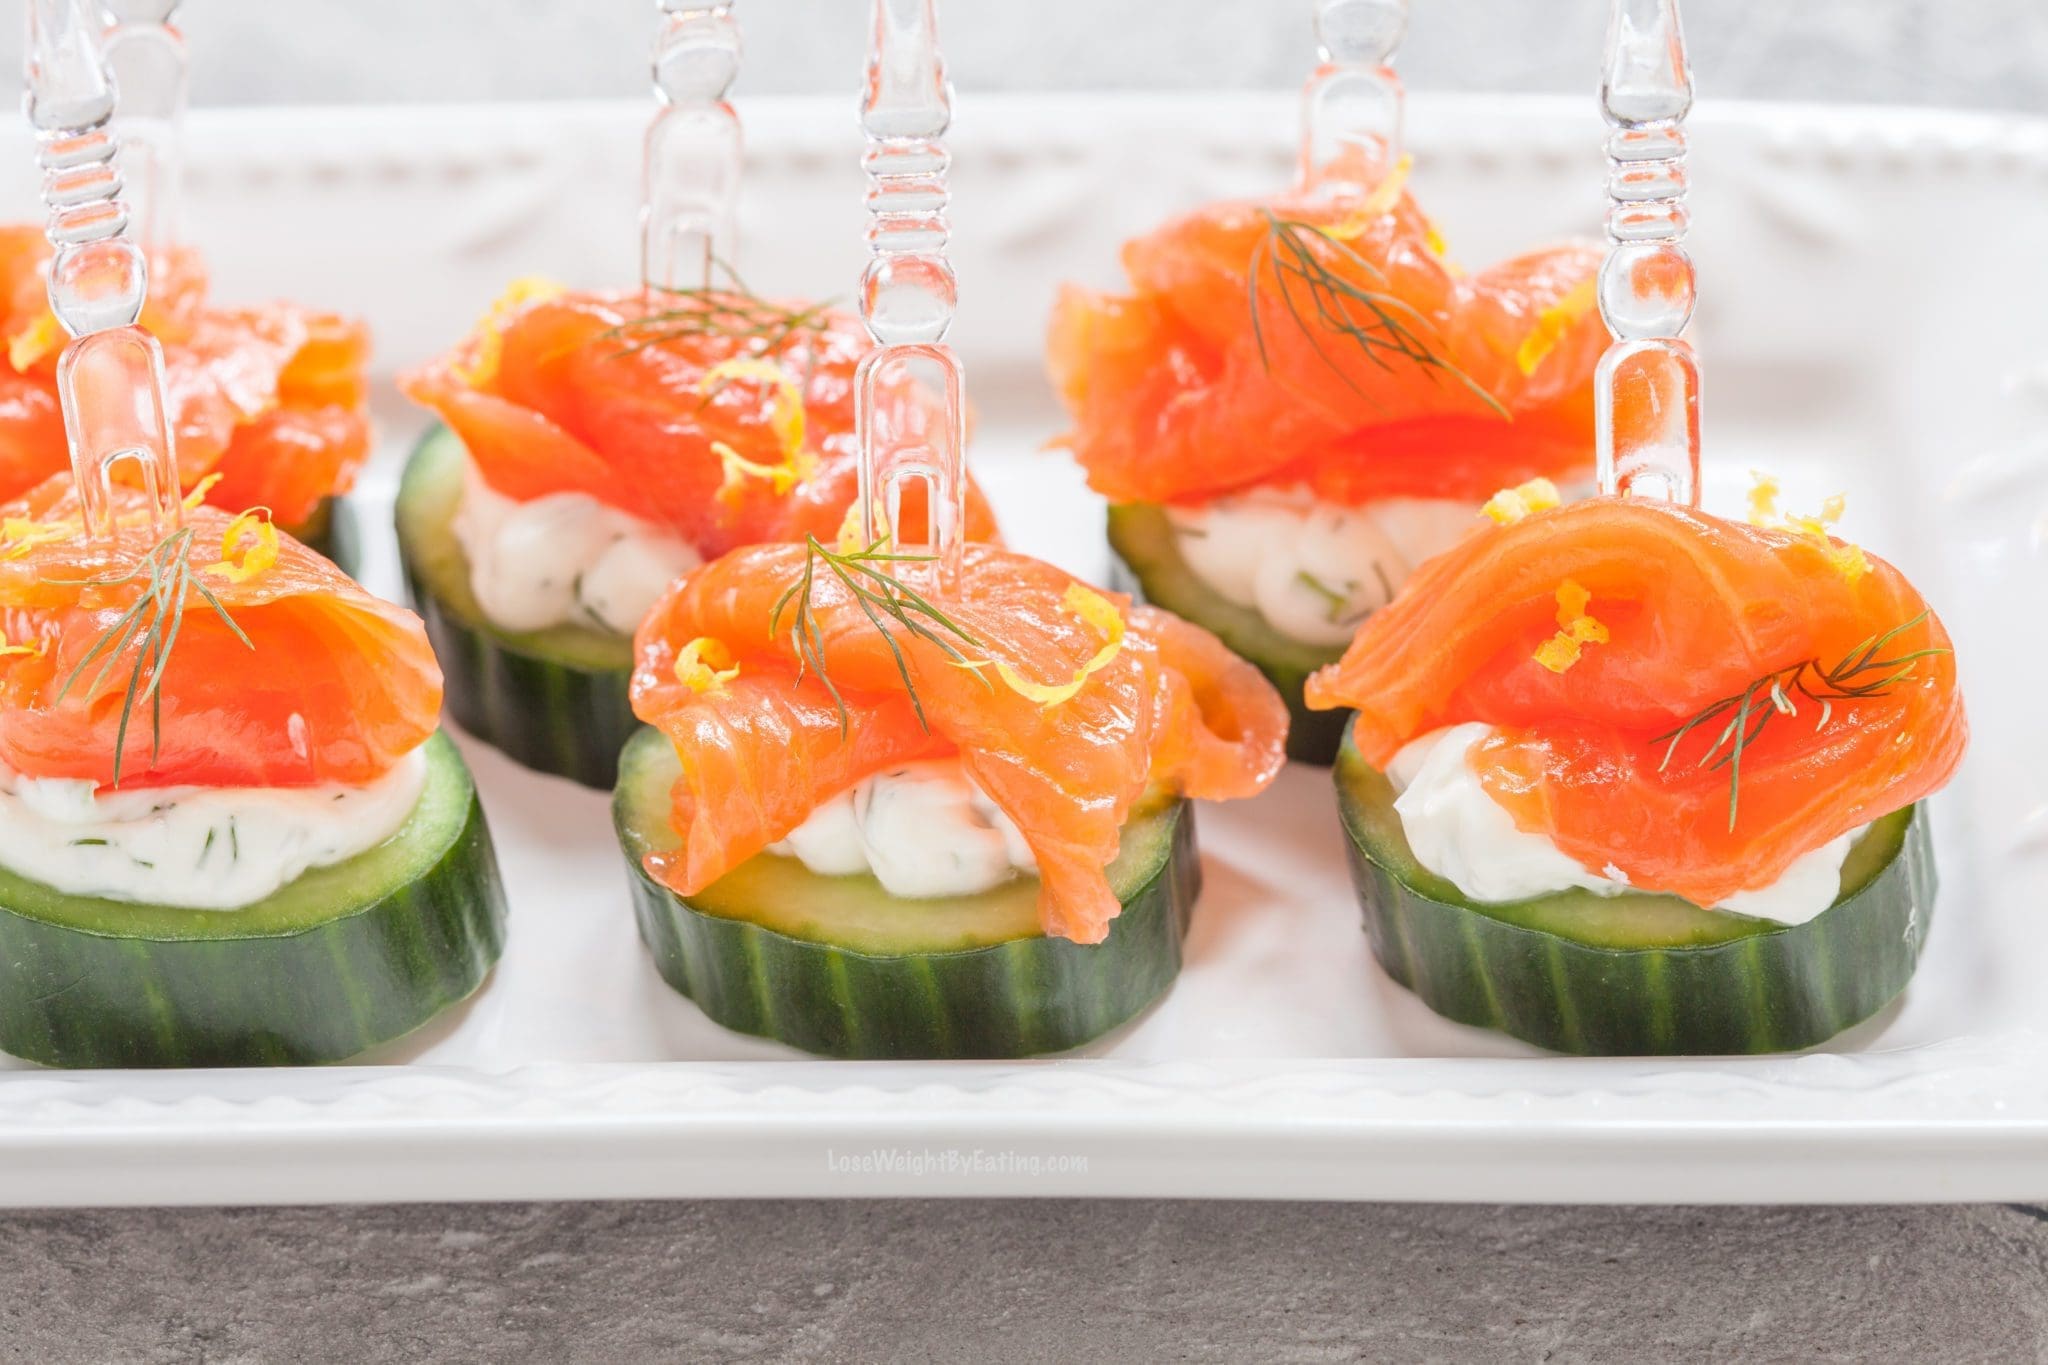 Low Calorie Smoked Salmon Appetizer - Lose Weight By Eating